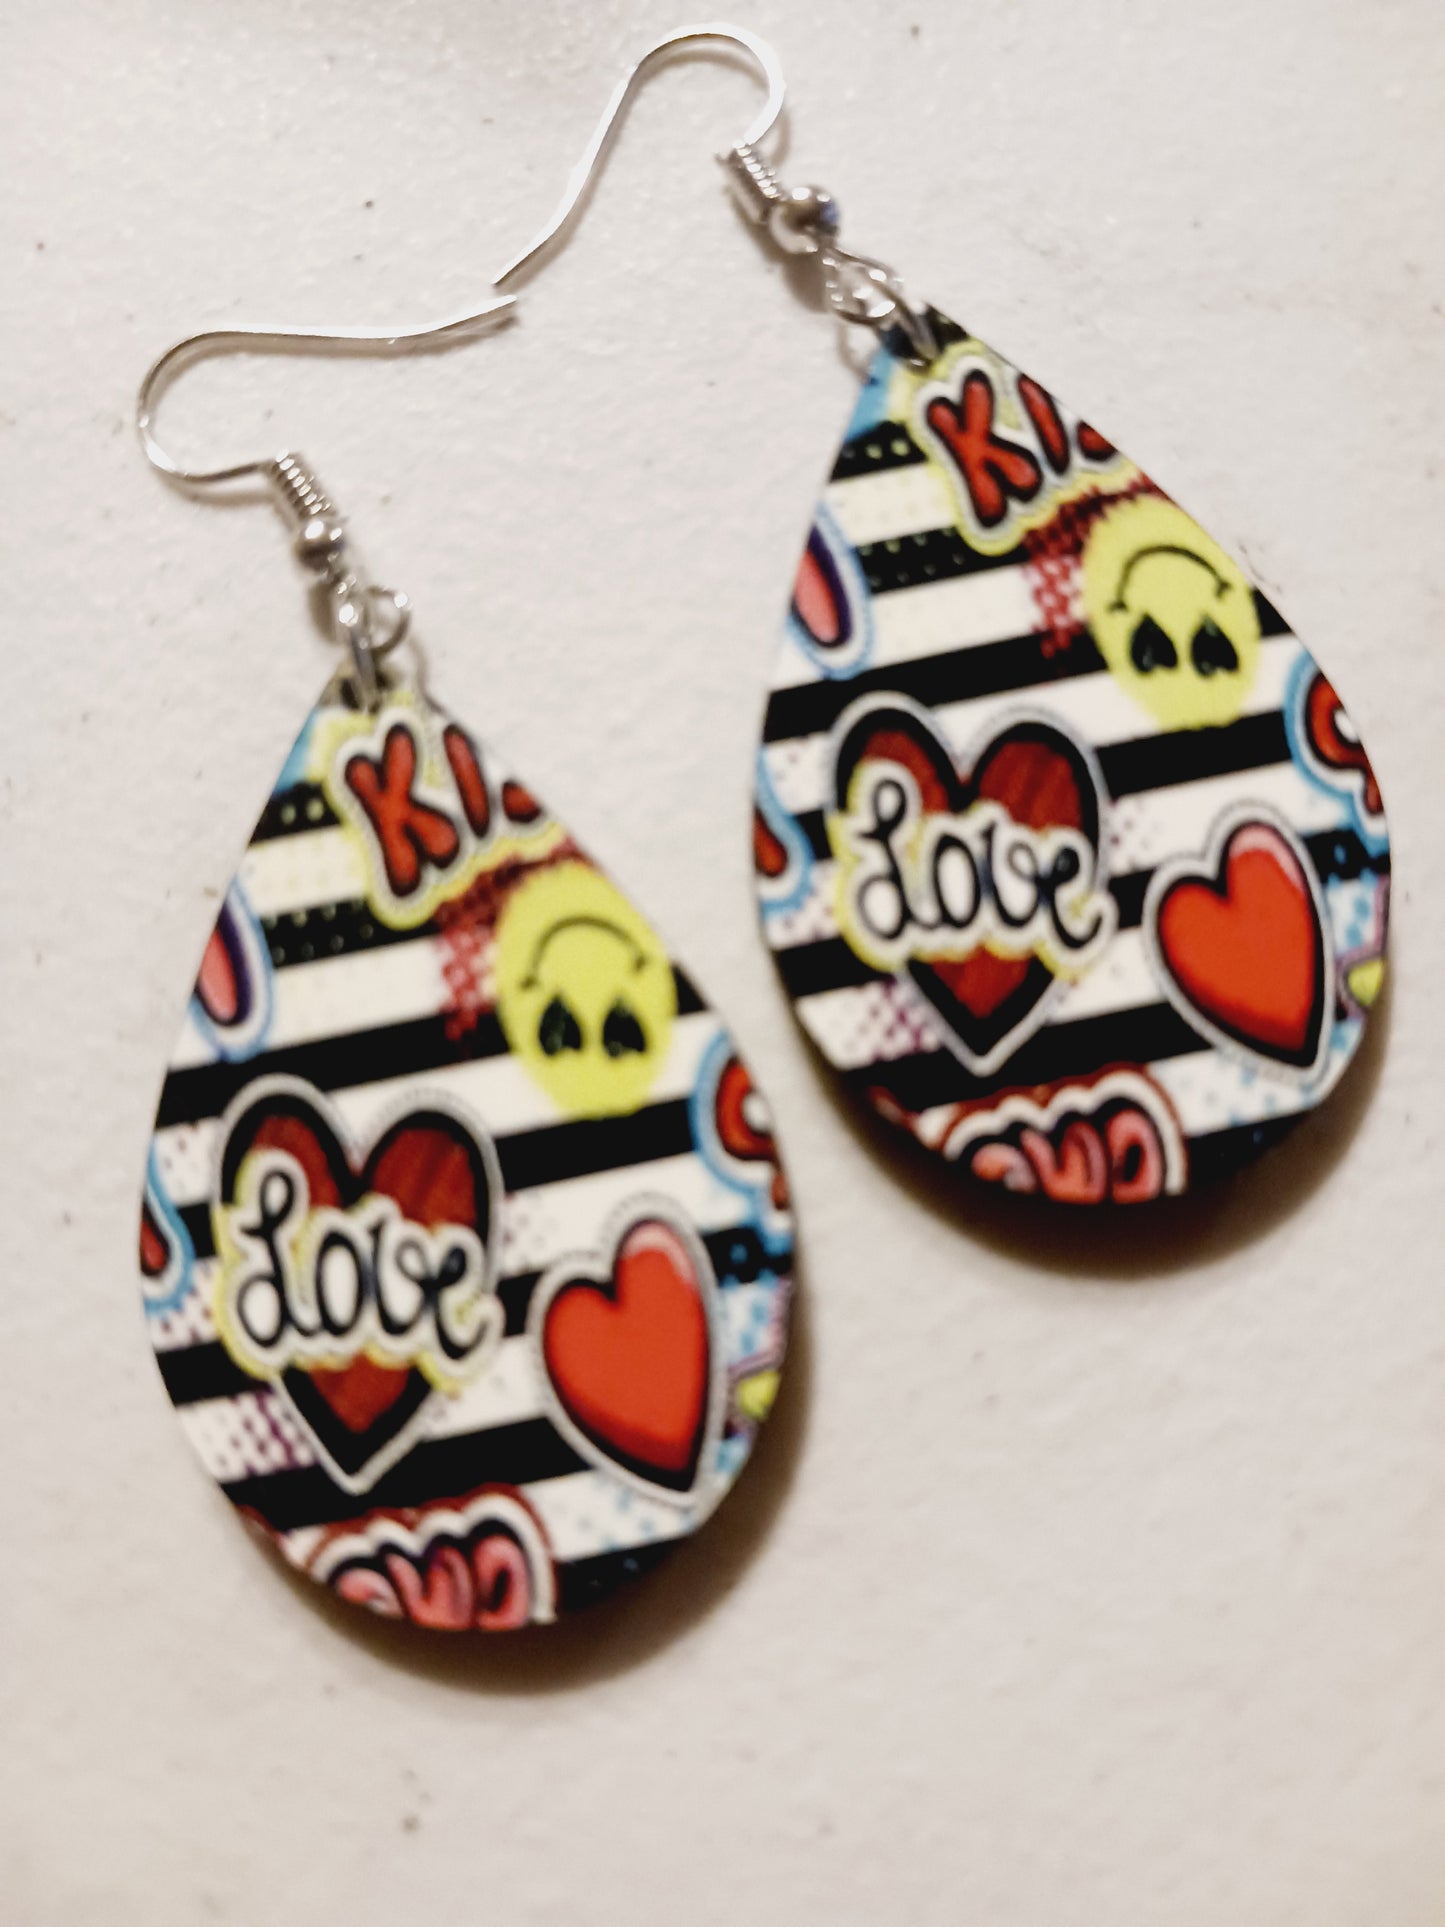 In love and be happy earrings